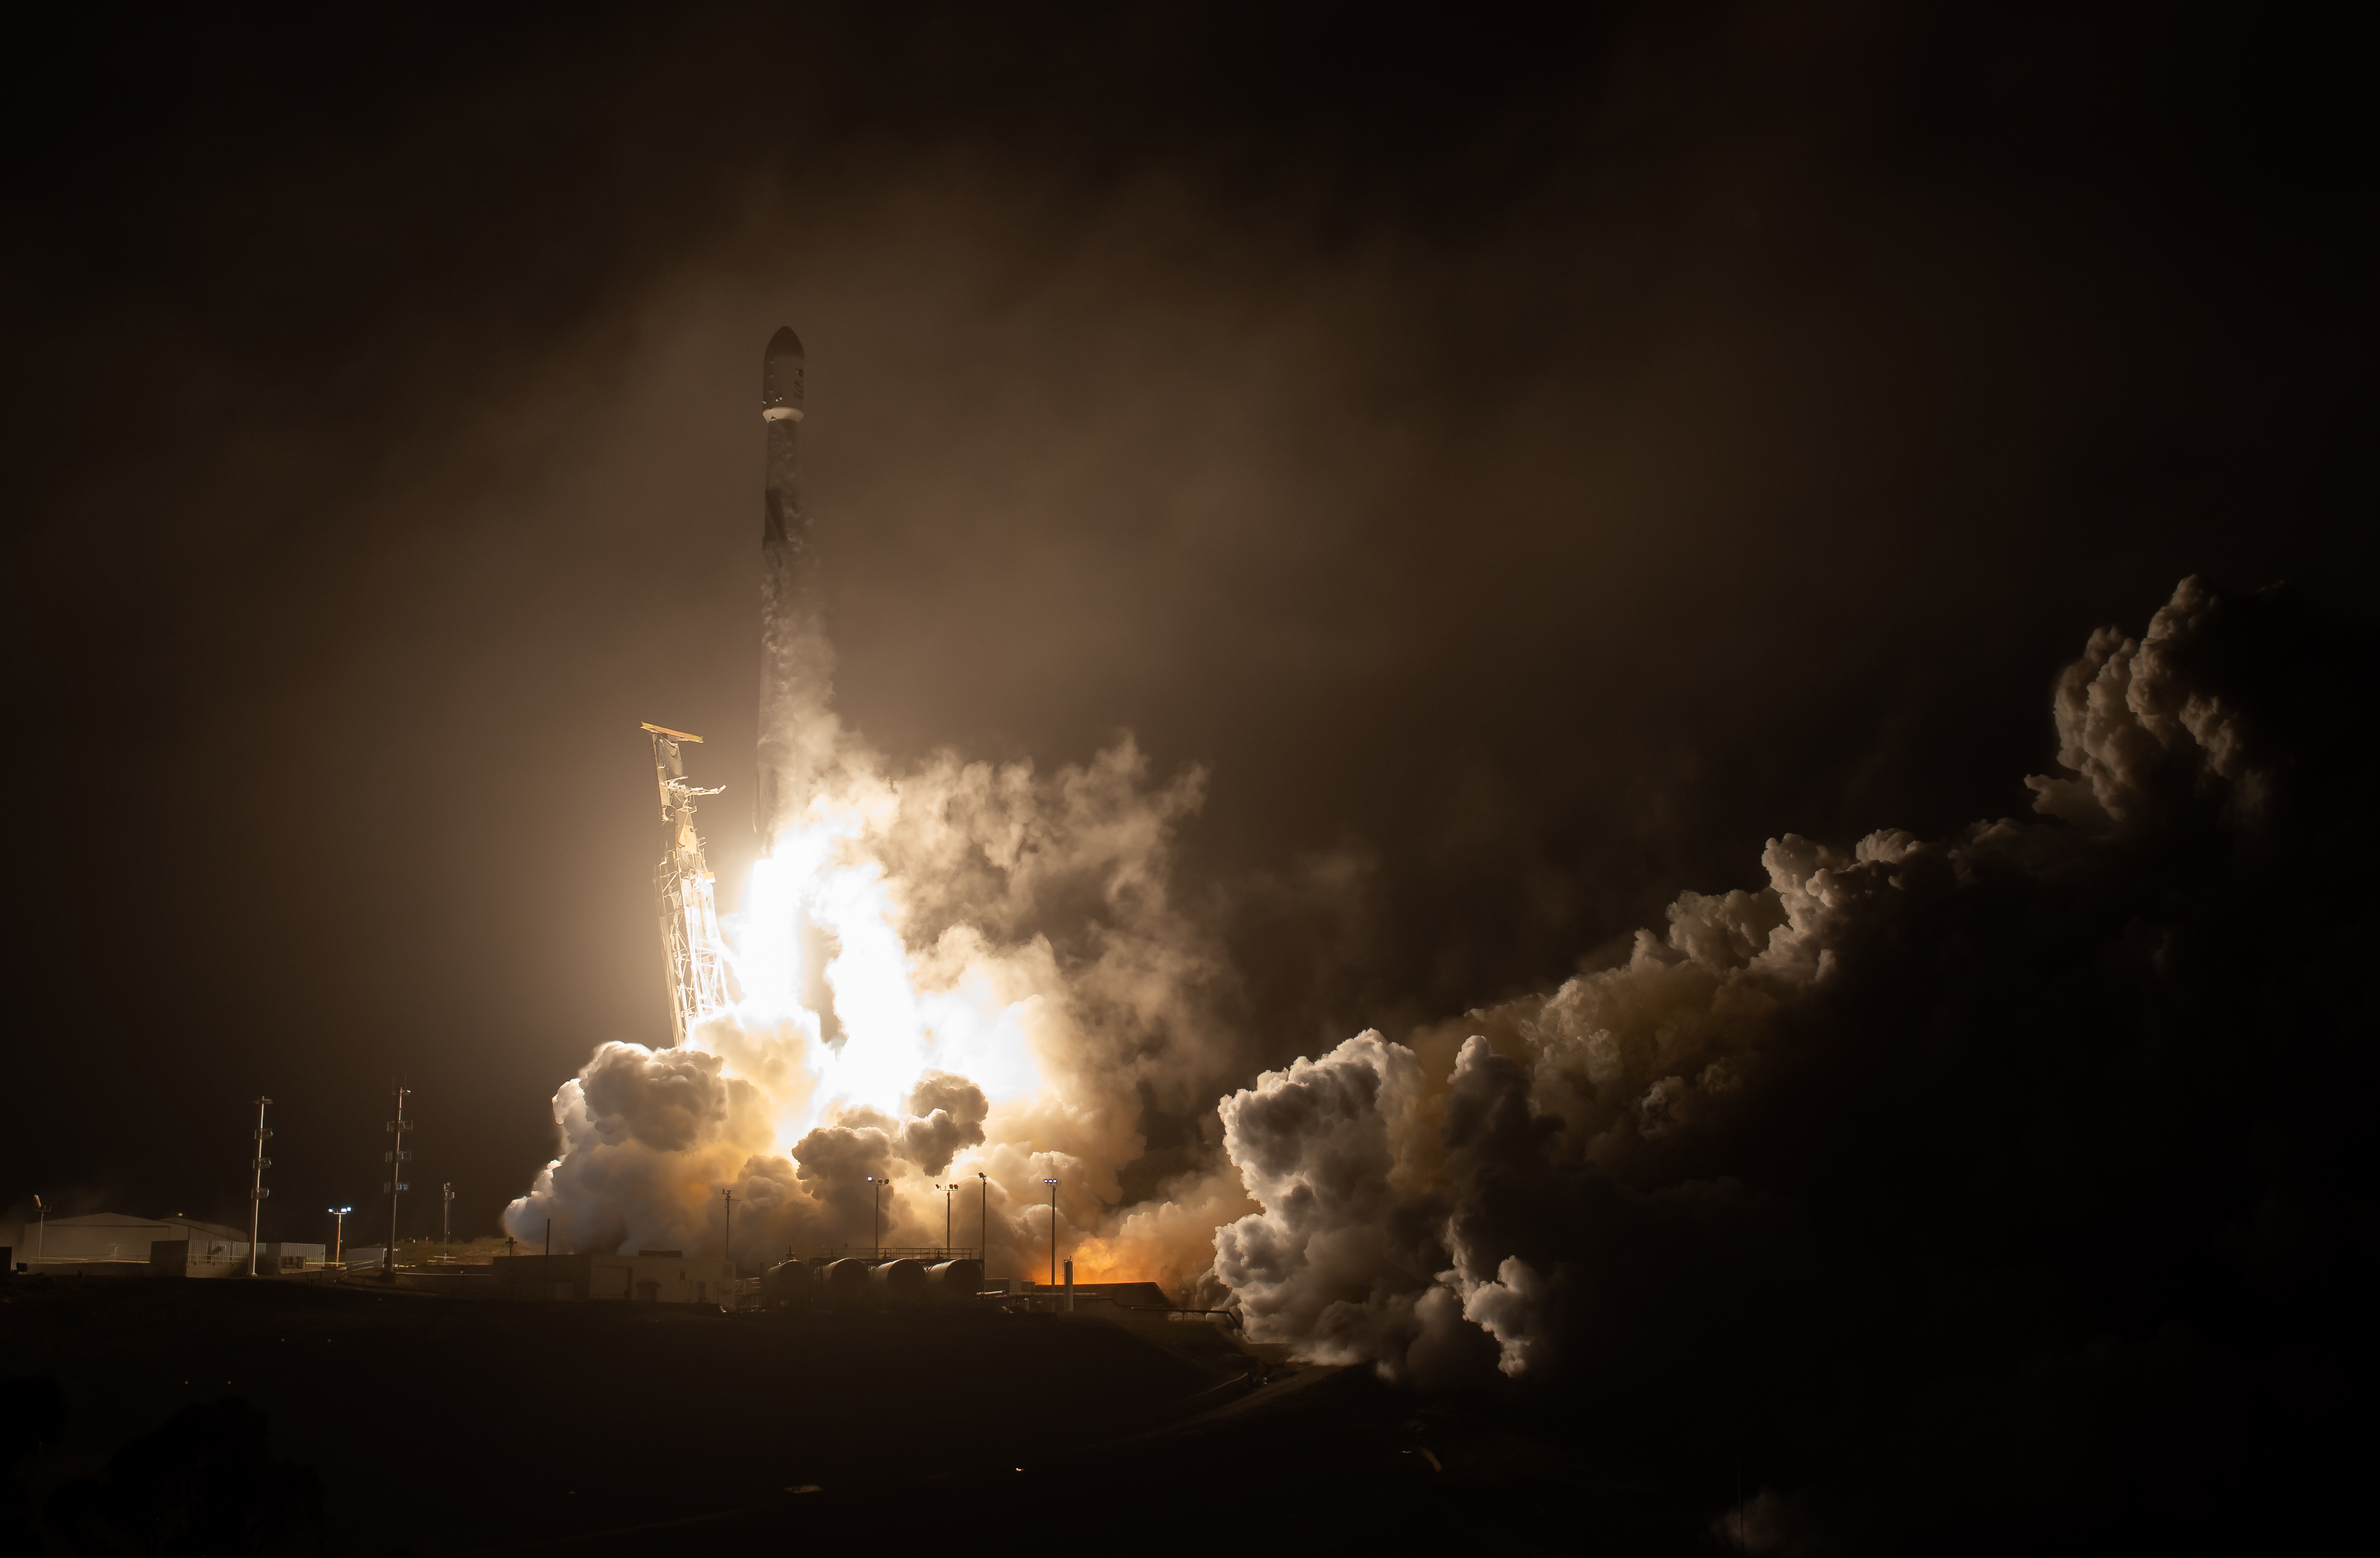 The SpaceX Falcon 9 rocket launches with the Double Asteroid Redirection Test, or DART, spacecraft onboard.